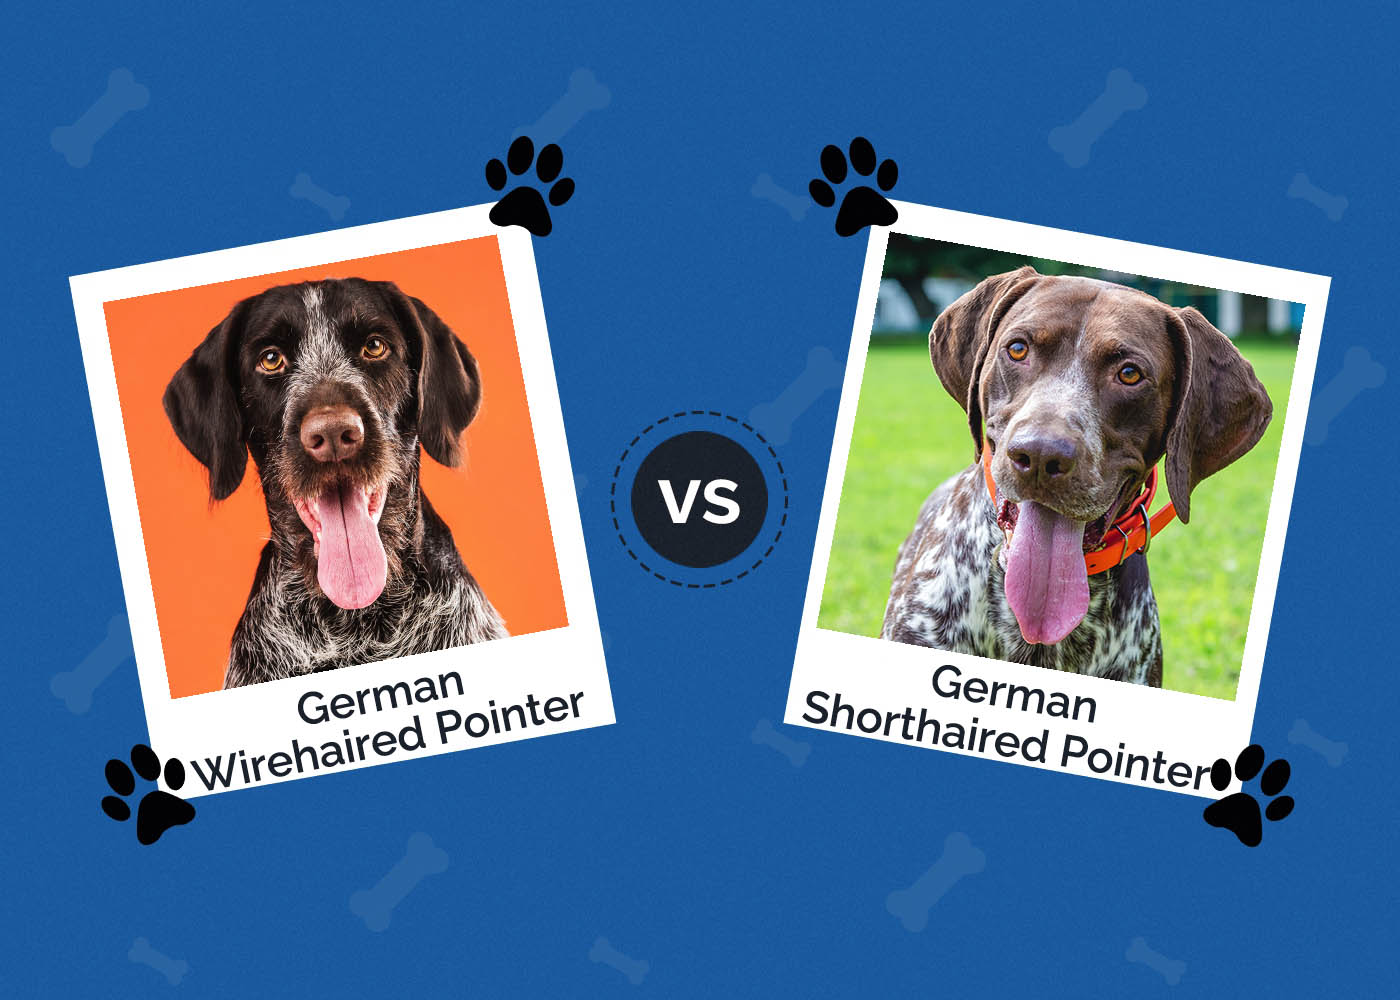 German Wirehaired Pointer vs German Shorthaired Pointer